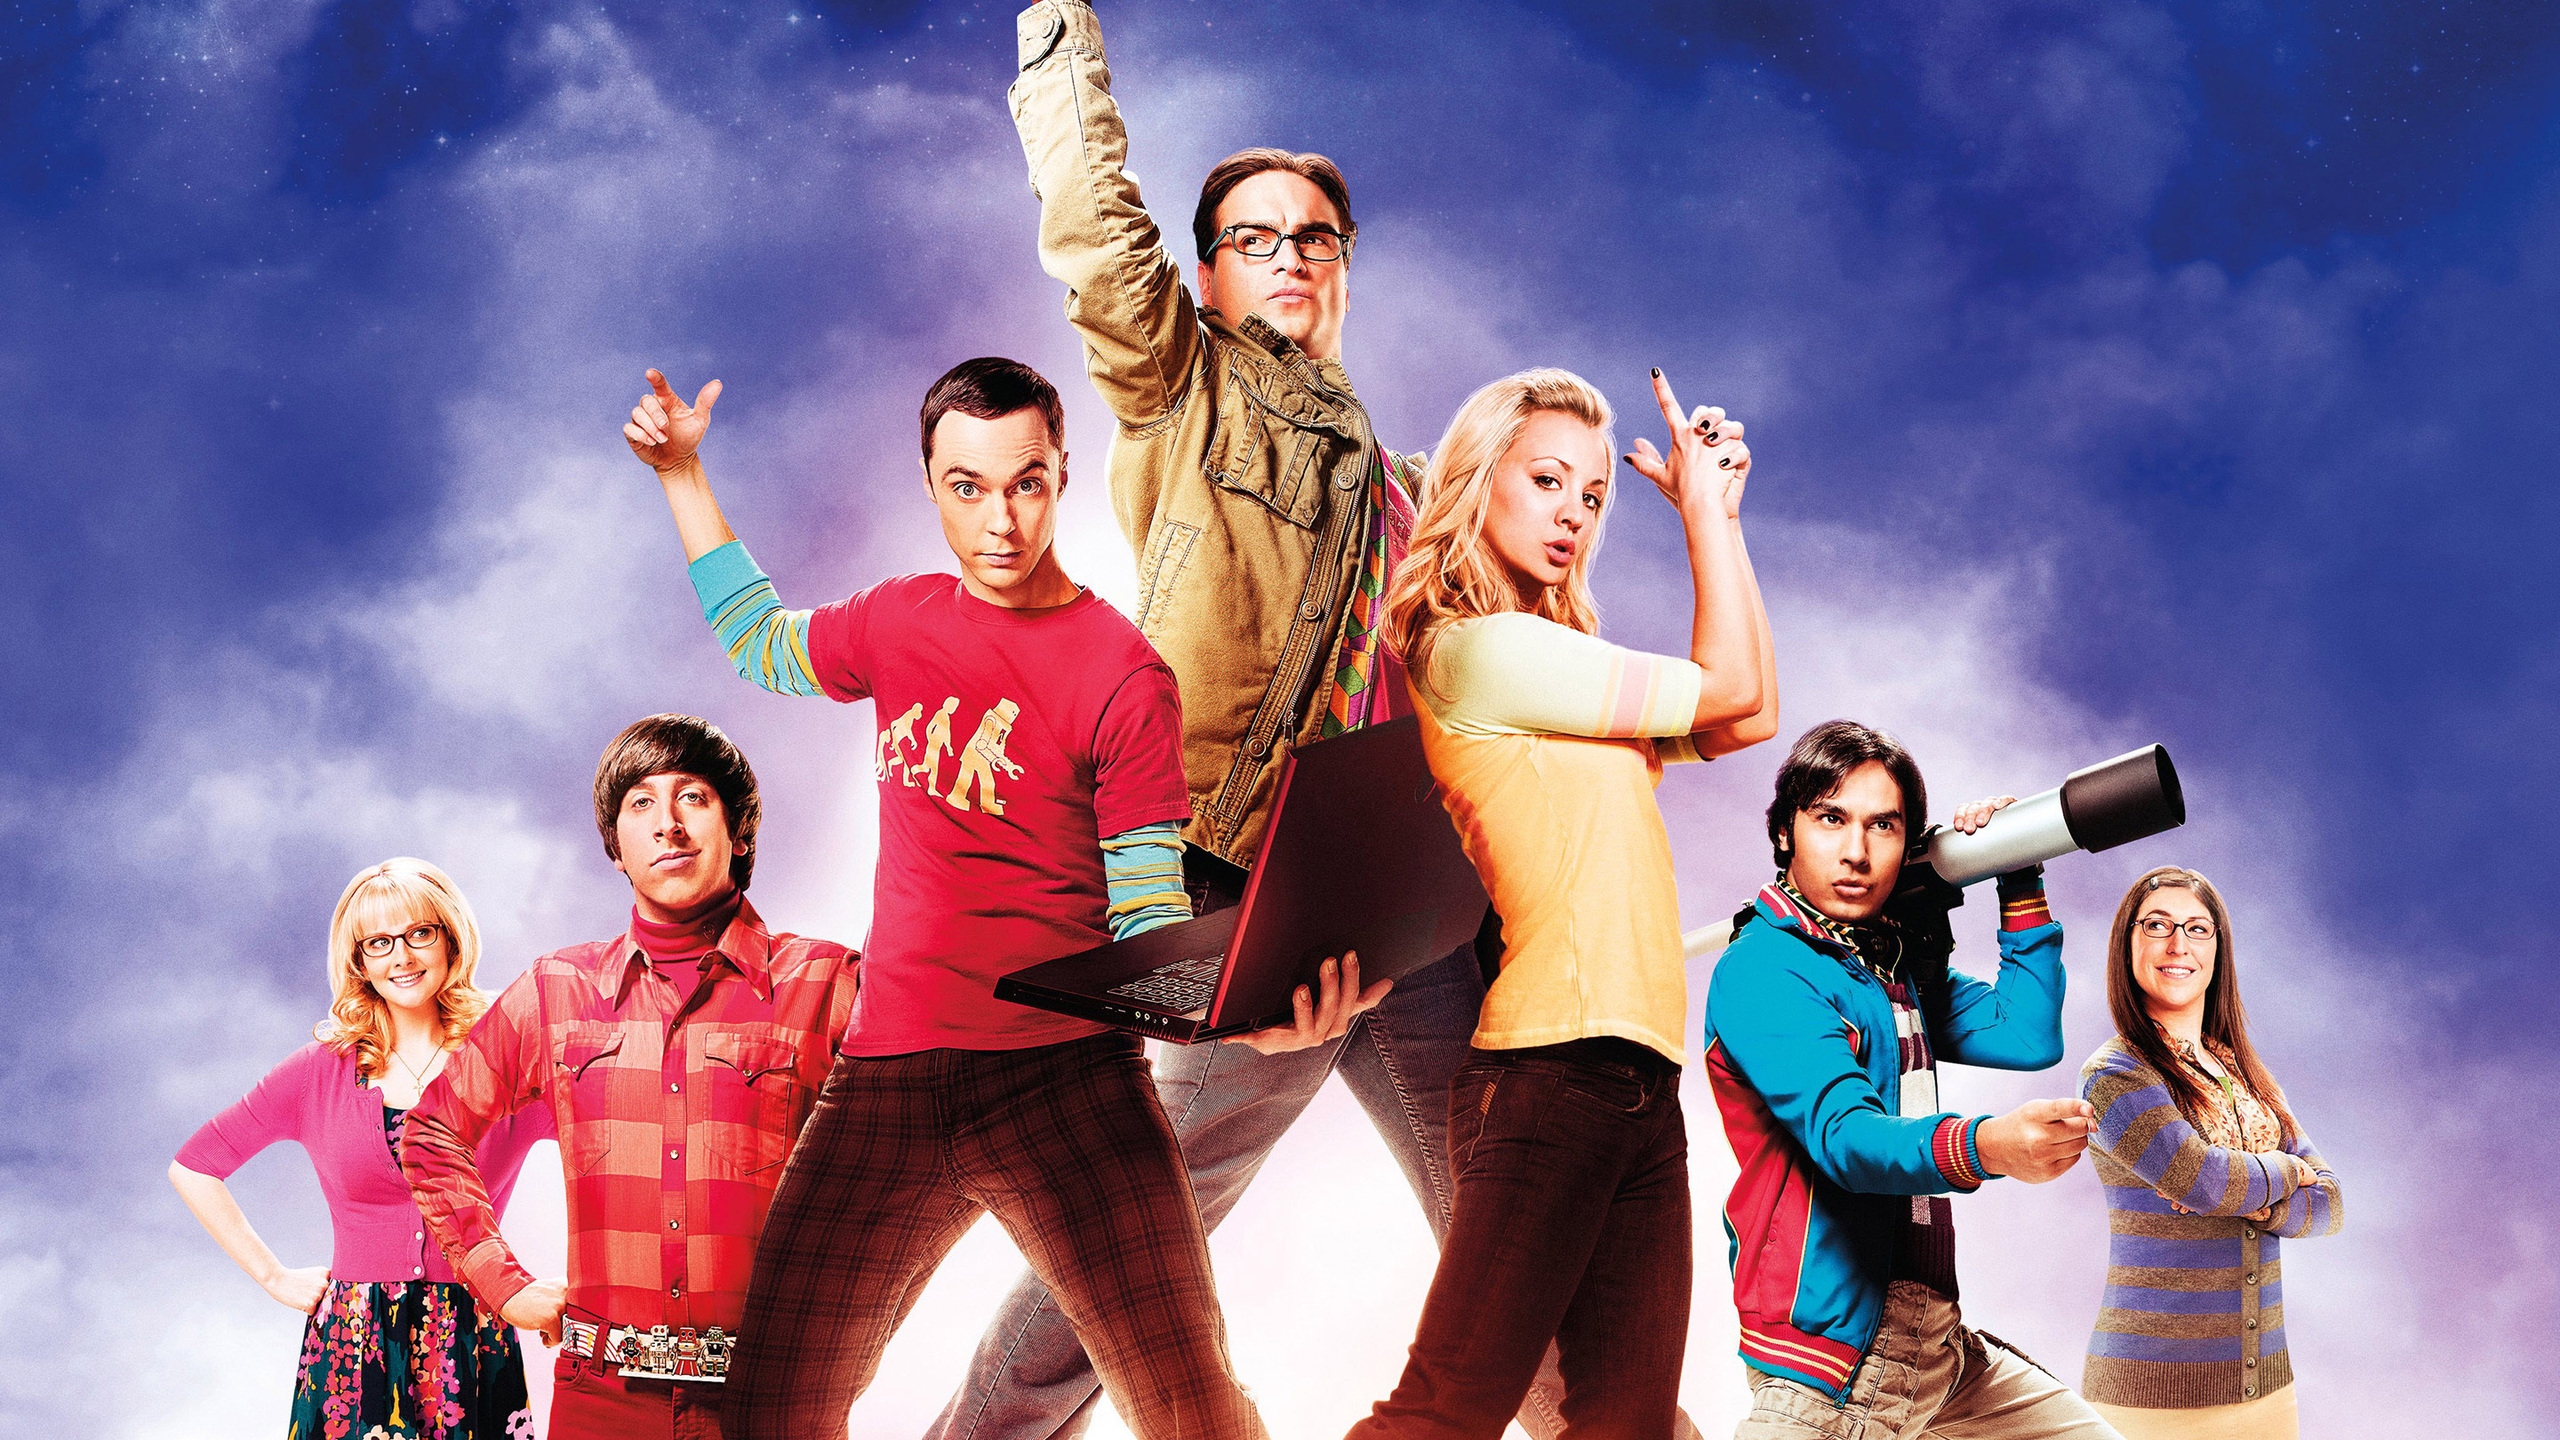 The Big Bang Theory TV Series Cast Poster  for 2560x1440 HDTV resolution